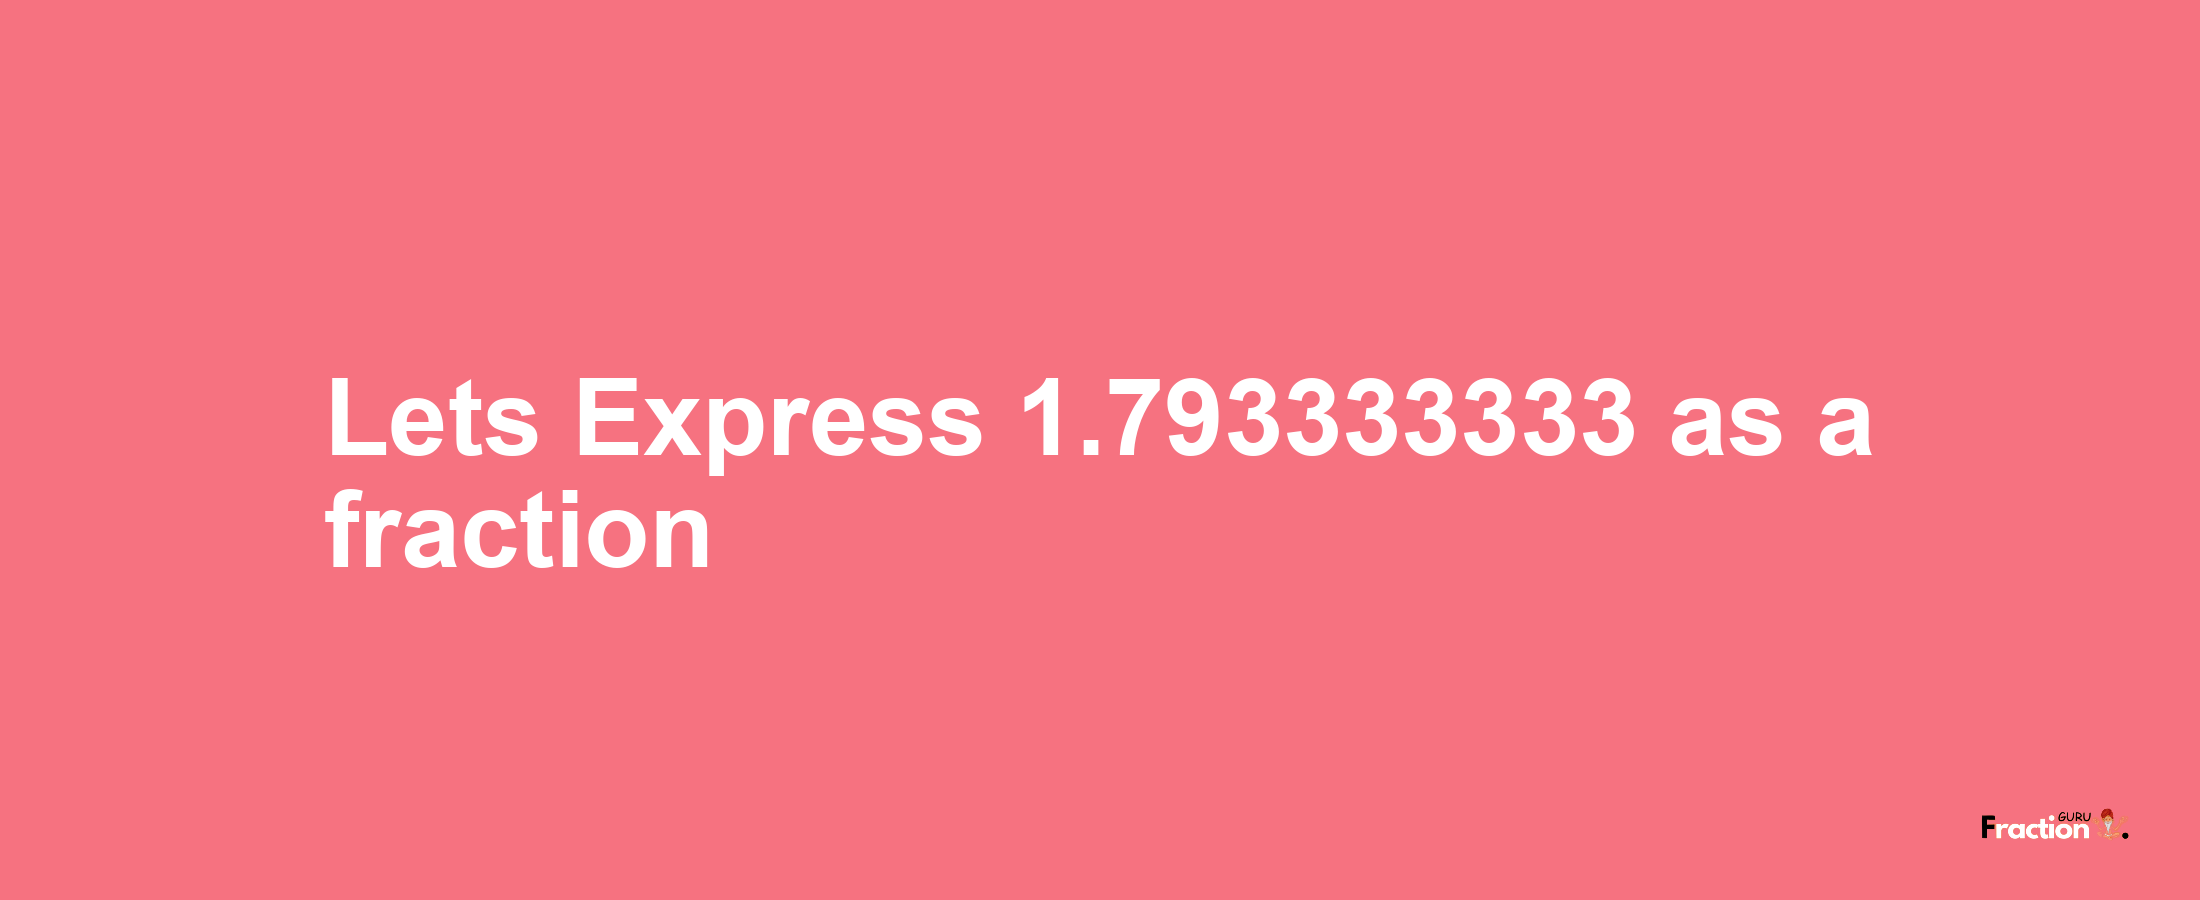 Lets Express 1.793333333 as afraction